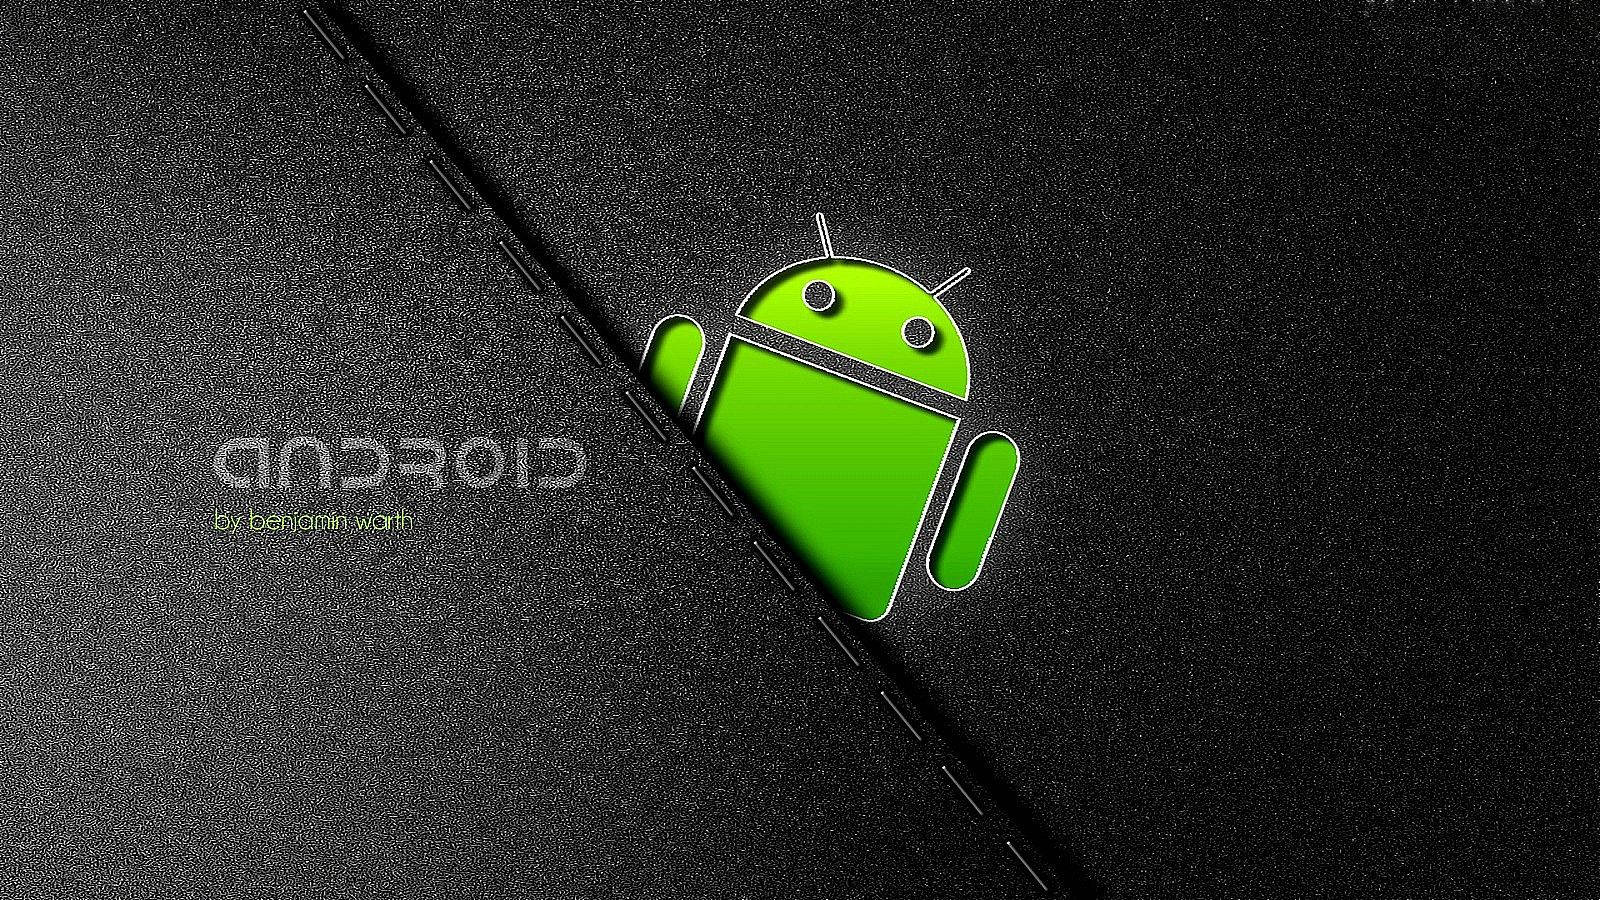 Android's Innovative Robot Wallpaper